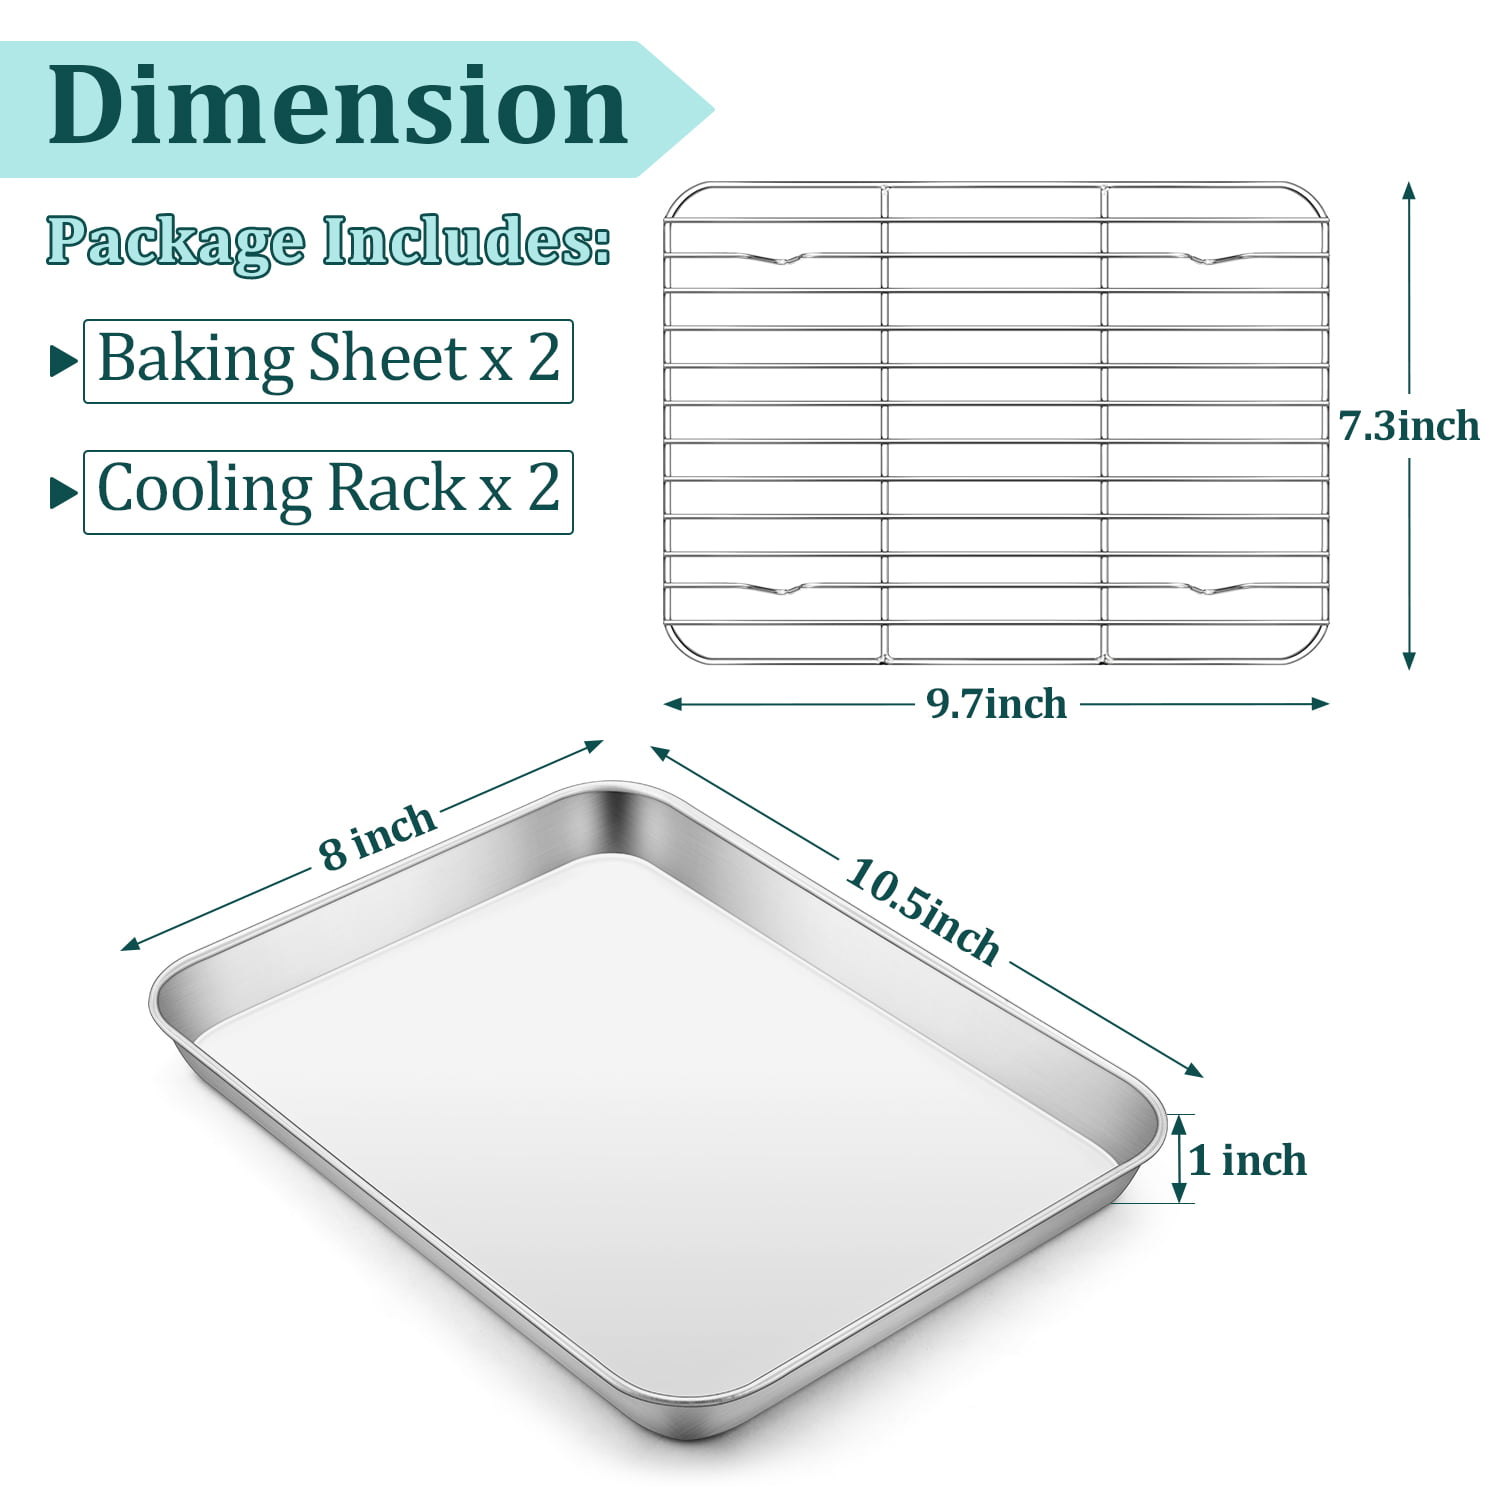 Walchoice Stainless Steel Baking Sheets, Professional Cookie Sheet Set of 2, Metal Oven Trays, Size: 16 x 12 x 1, Silver